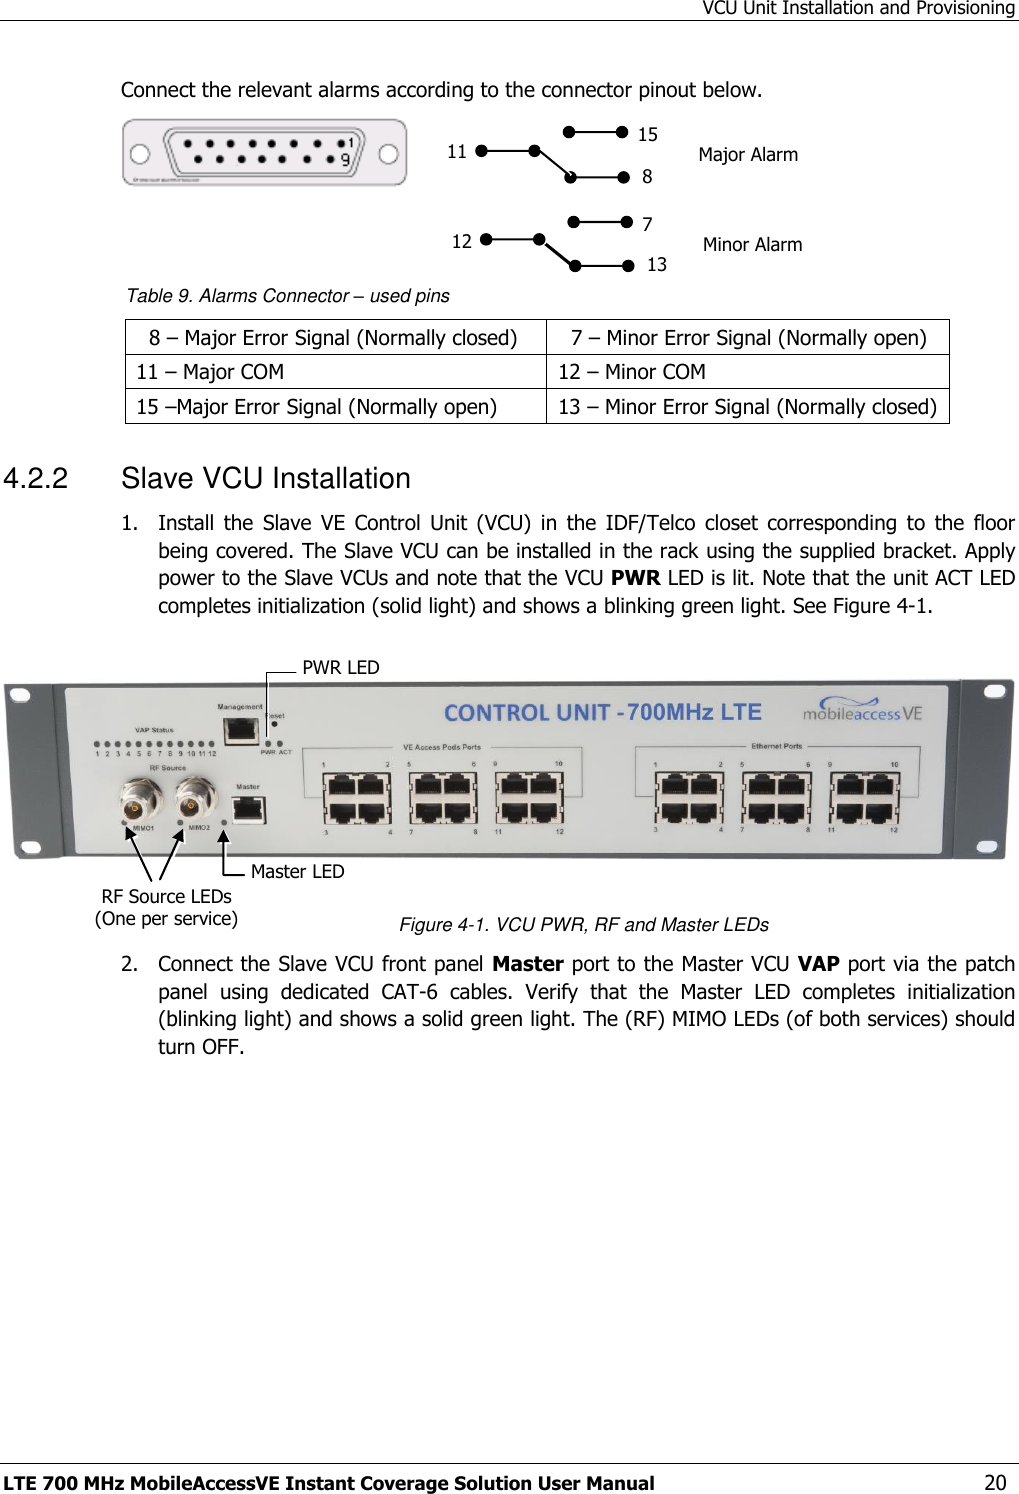 VCU Unit Installation and Provisioning LTE 700 MHz MobileAccessVE Instant Coverage Solution User Manual  20 Connect the relevant alarms according to the connector pinout below.     Table 9. Alarms Connector – used pins   8 – Major Error Signal (Normally closed)   7 – Minor Error Signal (Normally open) 11 – Major COM  12 – Minor COM 15 –Major Error Signal (Normally open) 13 – Minor Error Signal (Normally closed) 4.2.2  Slave VCU Installation 1.  Install  the  Slave  VE  Control  Unit  (VCU)  in  the  IDF/Telco  closet  corresponding  to  the  floor being covered. The Slave VCU can be installed in the rack using the supplied bracket. Apply power to the Slave VCUs and note that the VCU PWR LED is lit. Note that the unit ACT LED completes initialization (solid light) and shows a blinking green light. See Figure 4-1.          Figure 4-1. VCU PWR, RF and Master LEDs 2.  Connect the Slave VCU front panel Master port to the Master VCU VAP port via the patch panel  using  dedicated  CAT-6  cables.  Verify  that  the  Master  LED  completes  initialization (blinking light) and shows a solid green light. The (RF) MIMO LEDs (of both services) should turn OFF.  11 15 8 Major Alarm 12 7 13 Minor Alarm PWR LED   Master LED  RF Source LEDs  (One per service) 